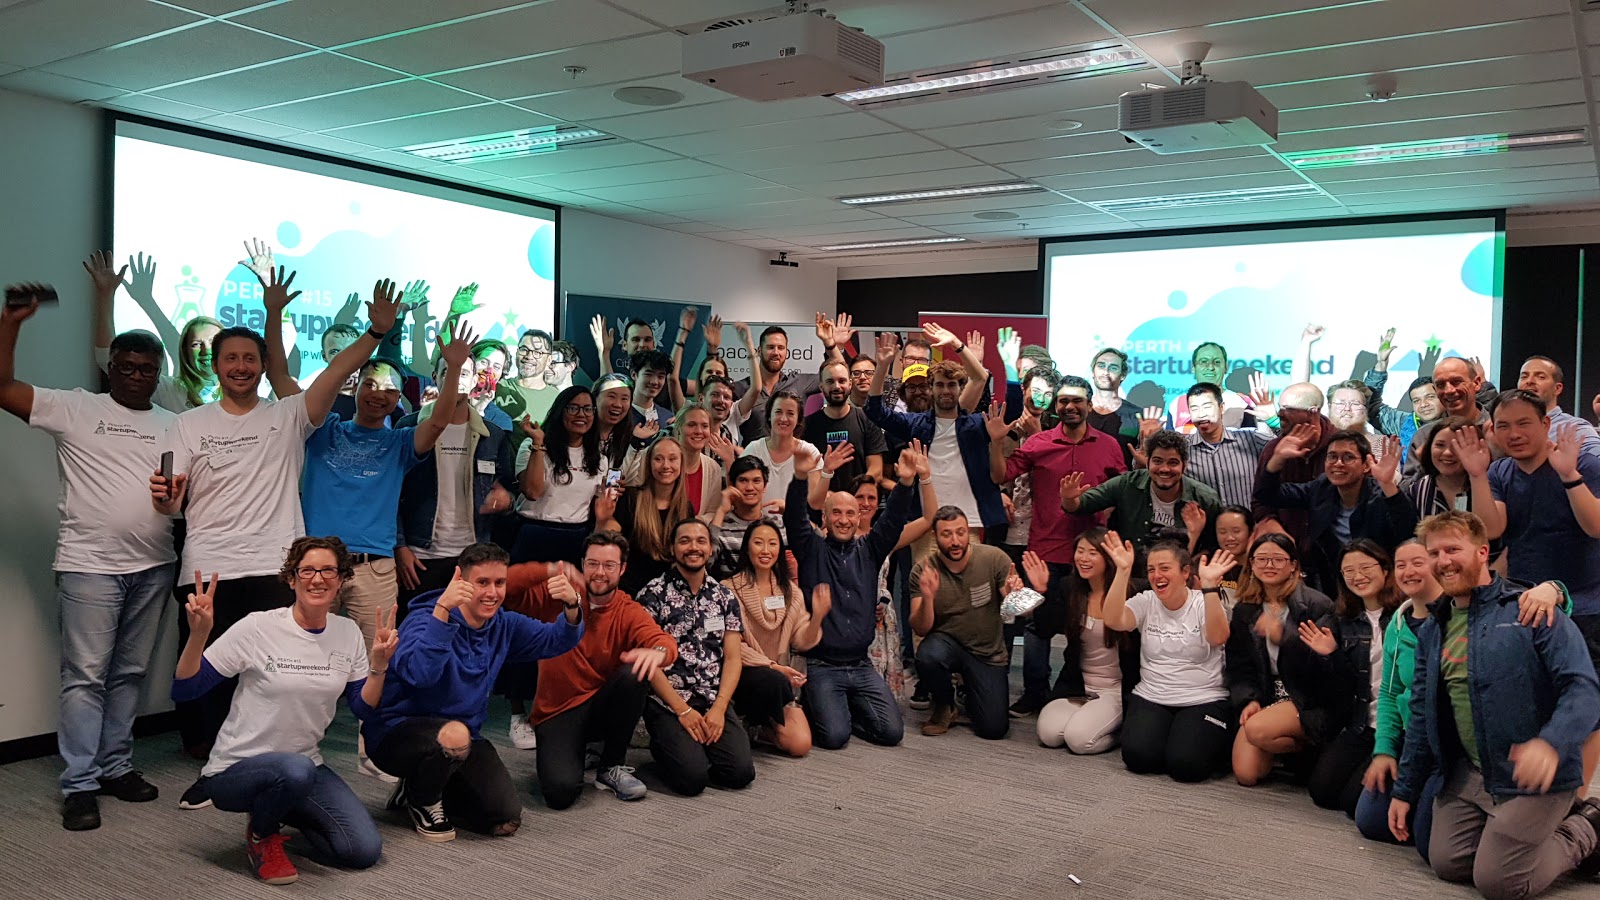 That’s a wrap on Startup Weekend #15!